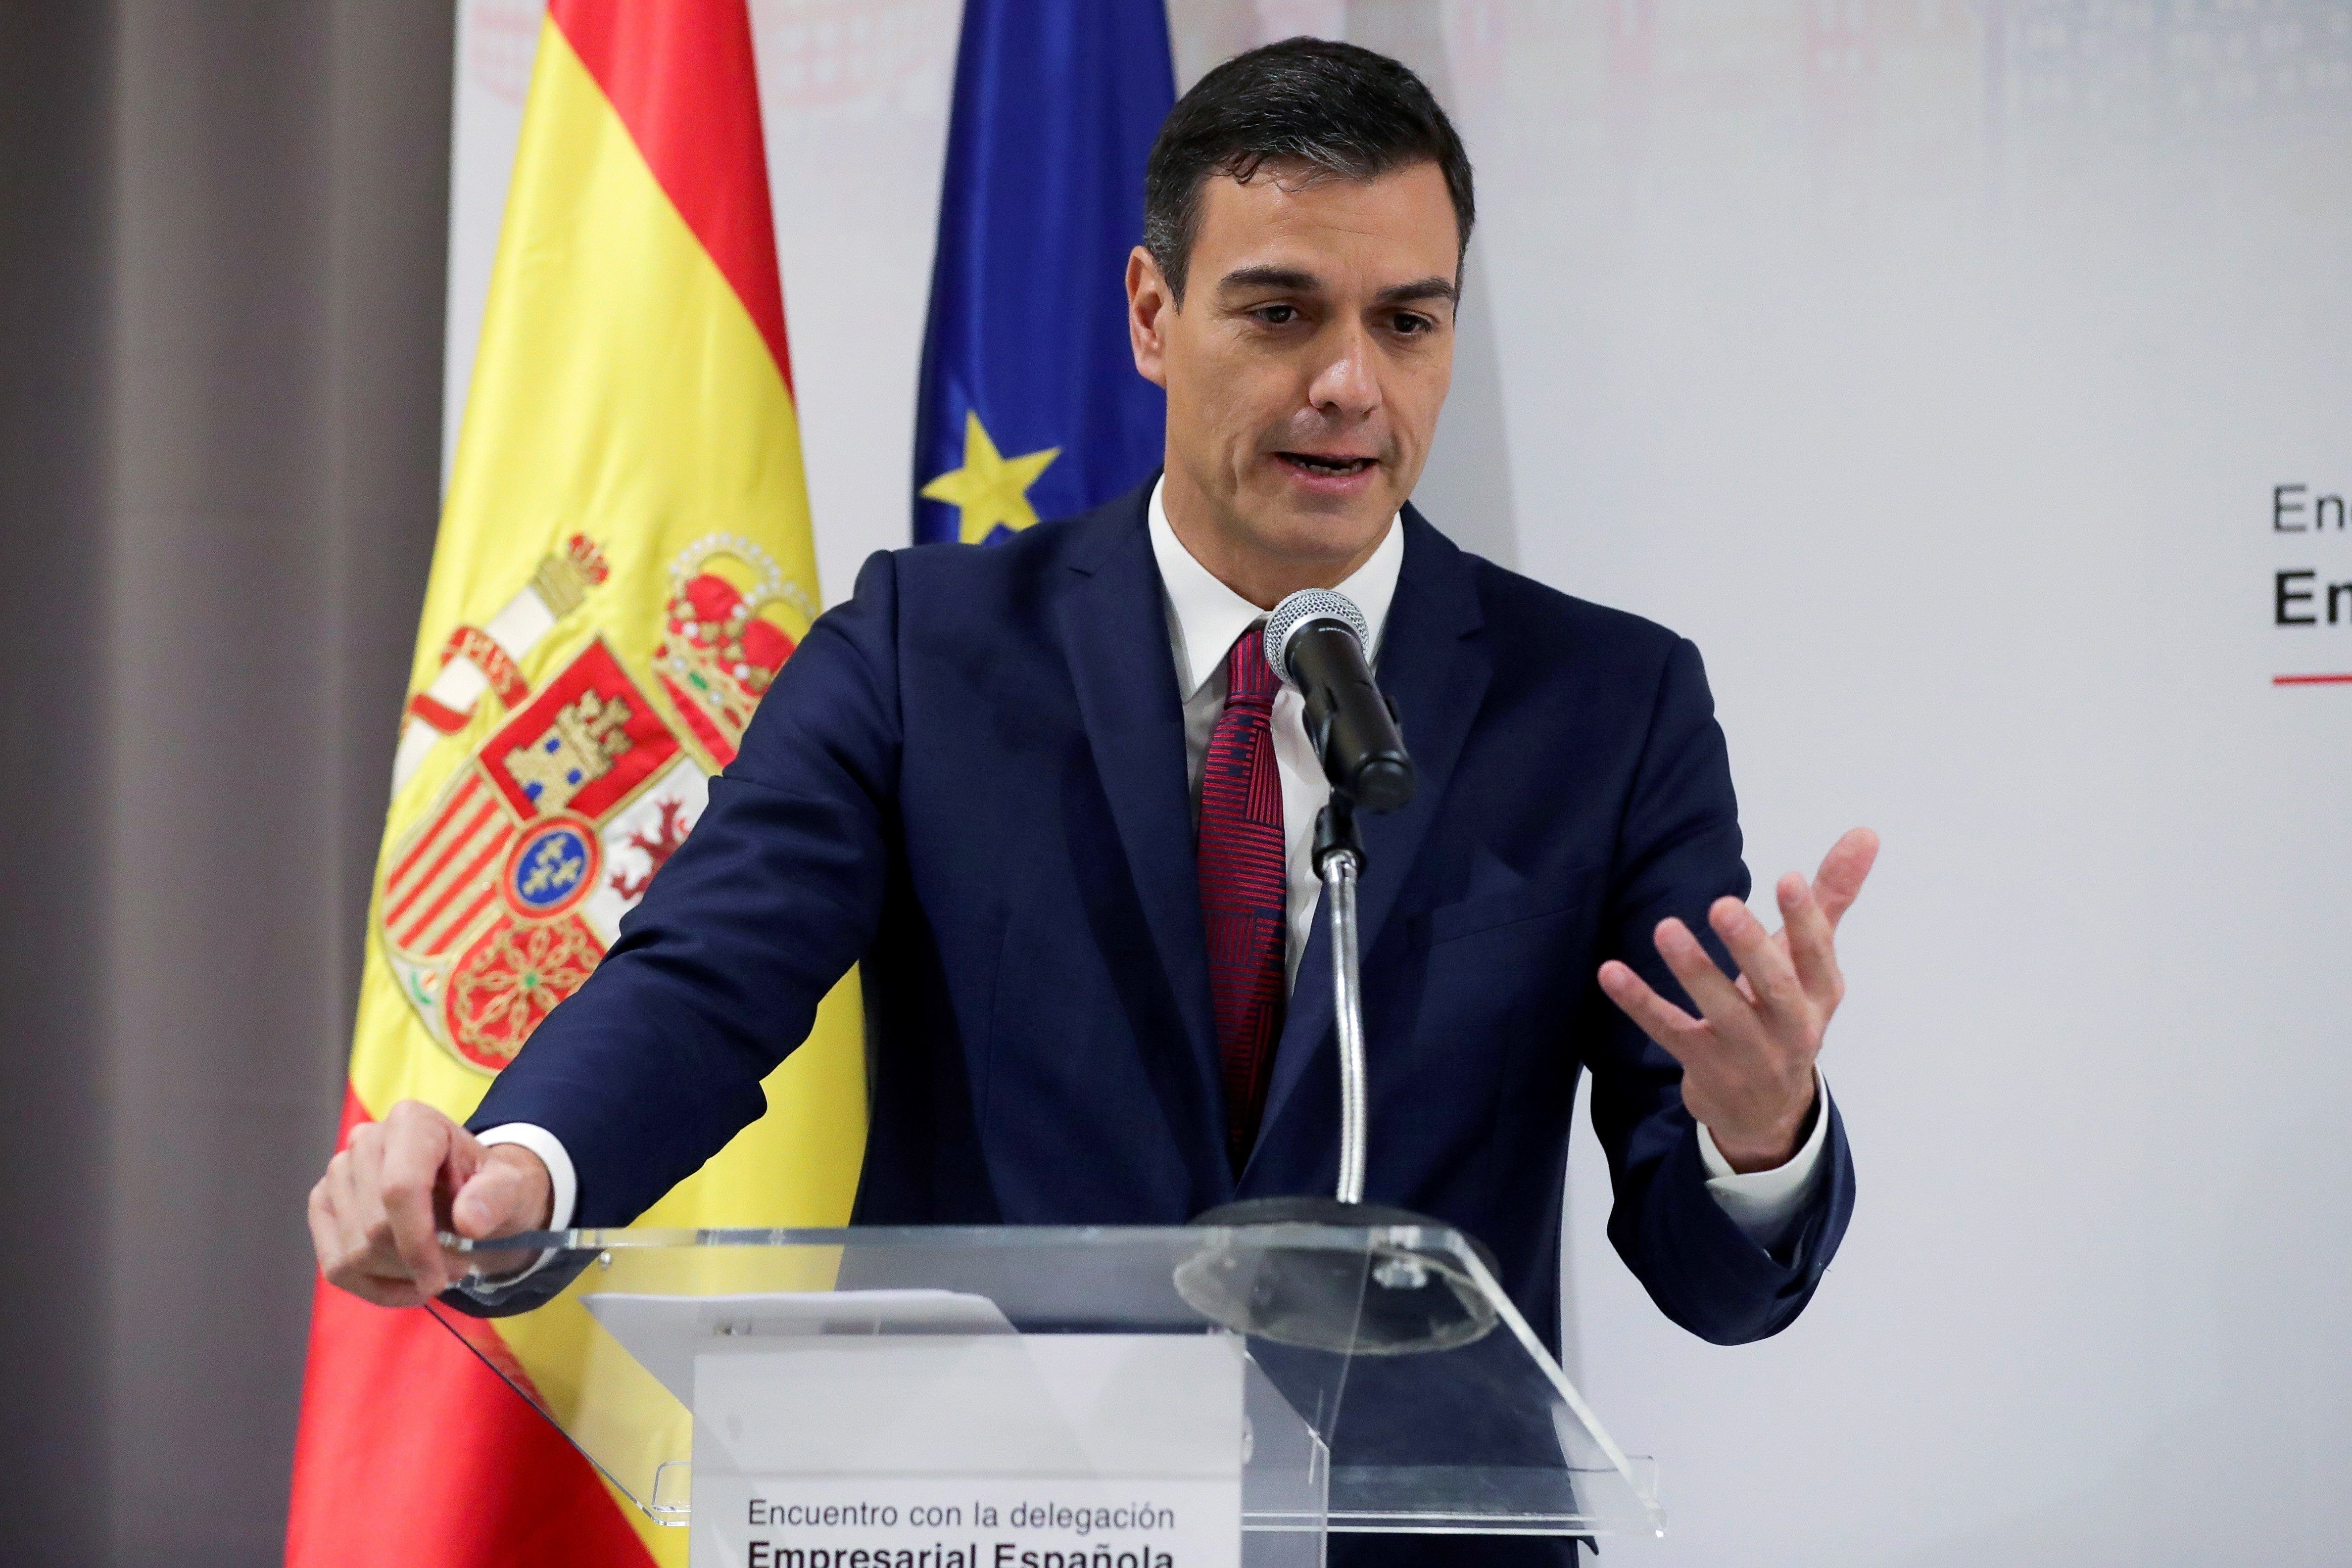 Sánchez rejects May's latest offer over Gibraltar